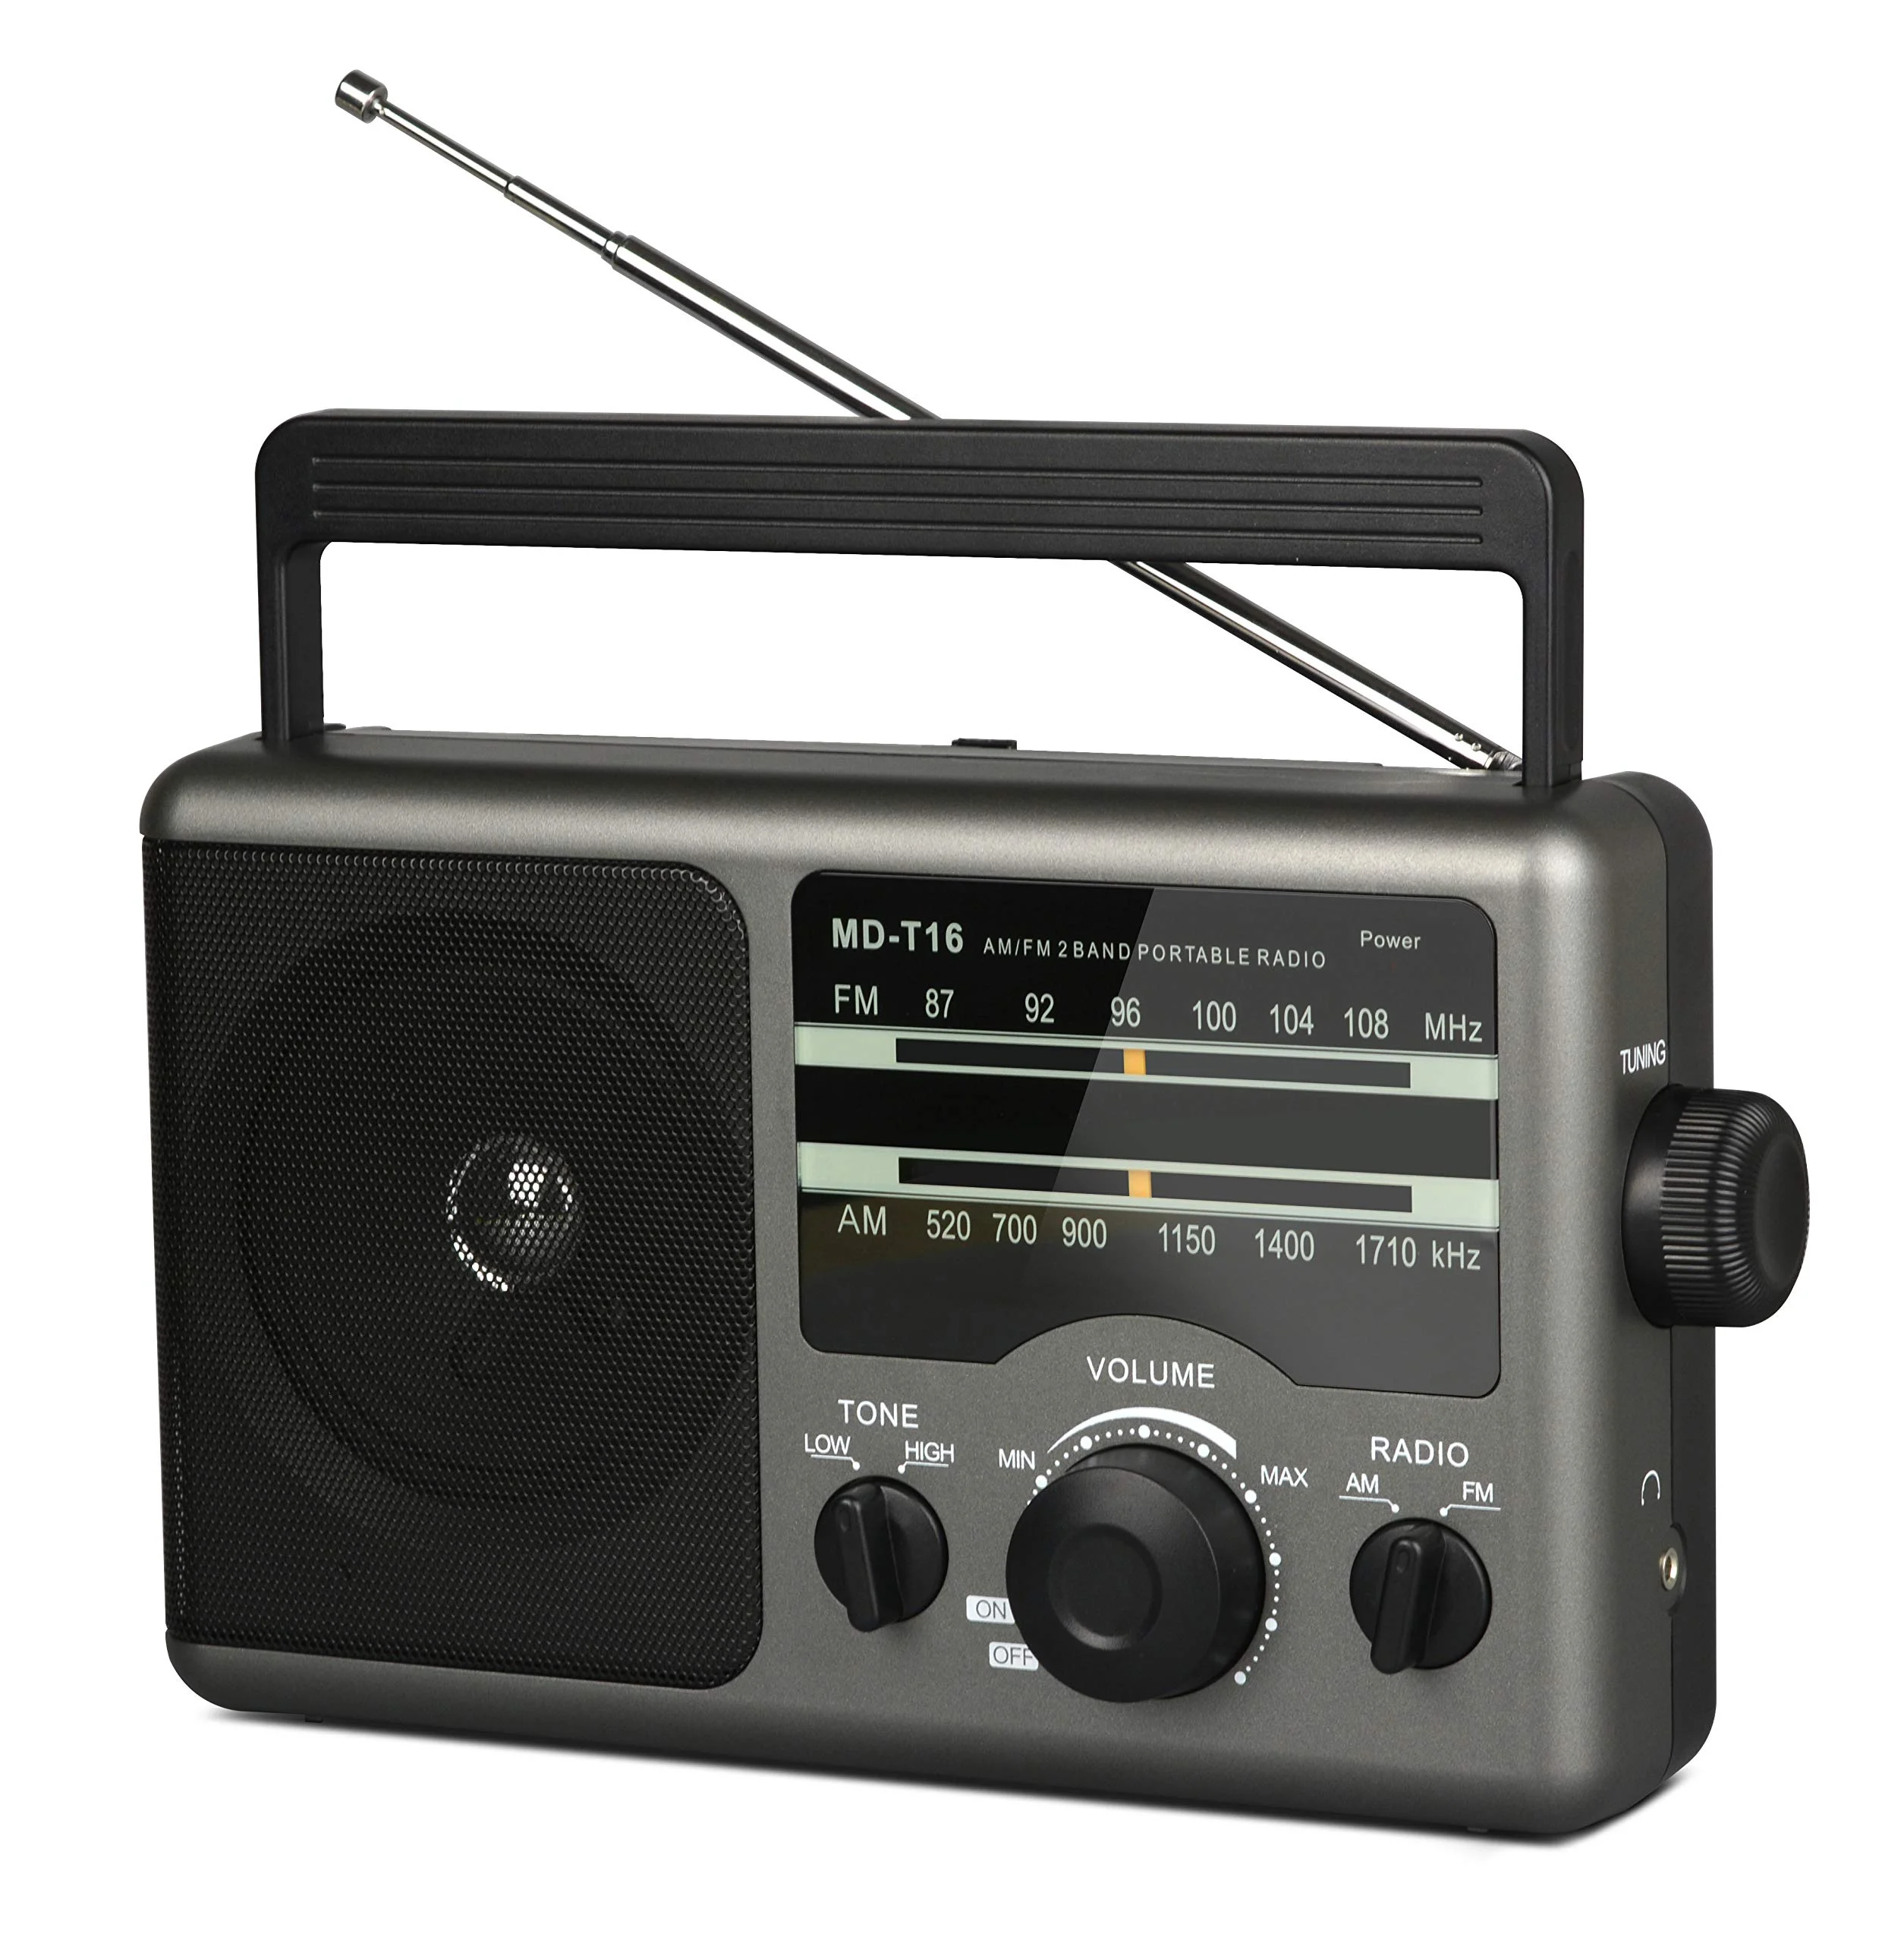 

Portable AM FM Radio Battery Operated Radio by 4D Cell Batteries or AC Power Transistor Radio with Big Knob,Big Speaker